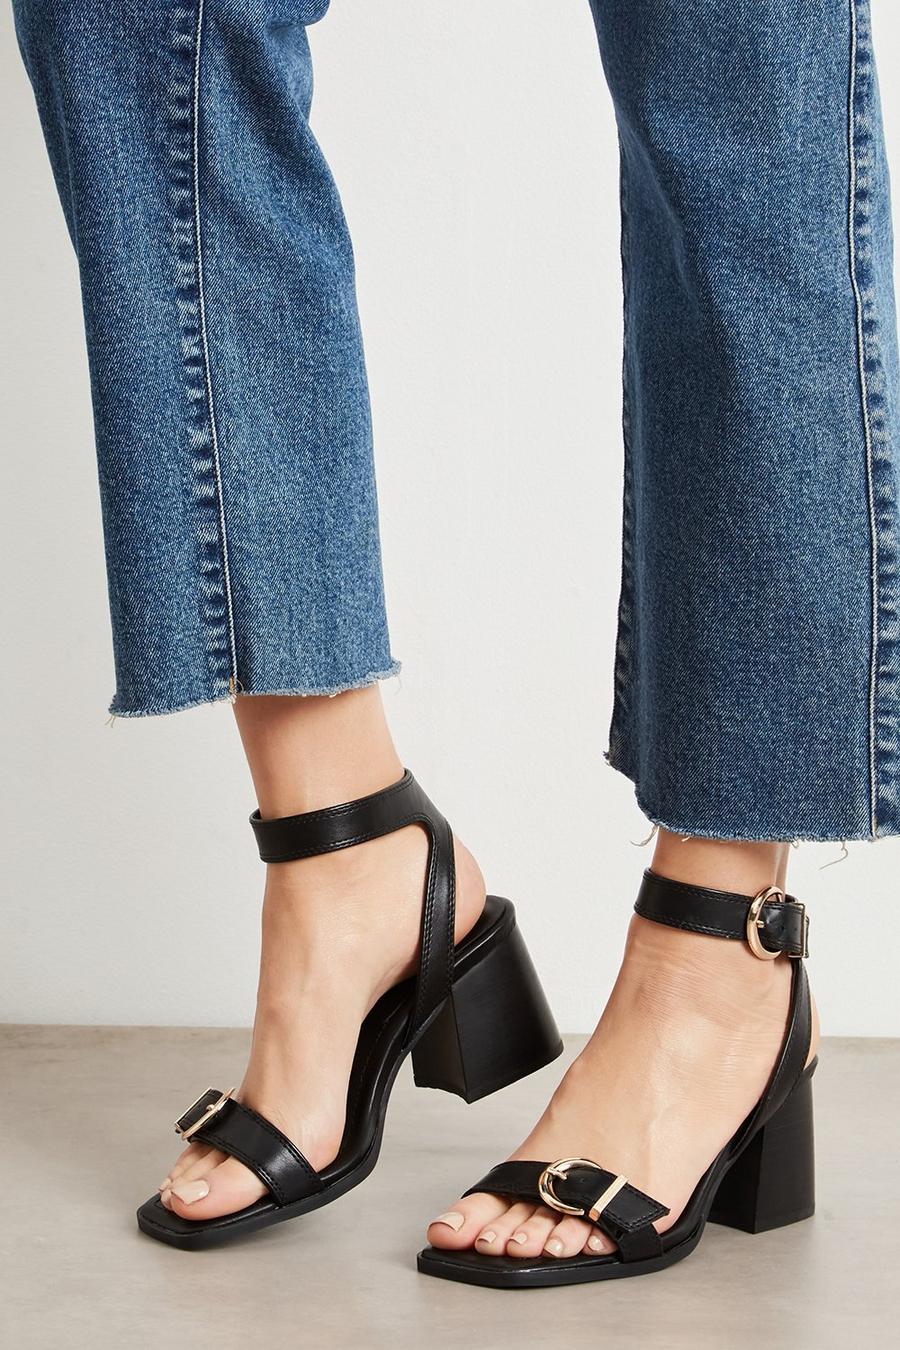 Principles: Daphne Barely There Heels